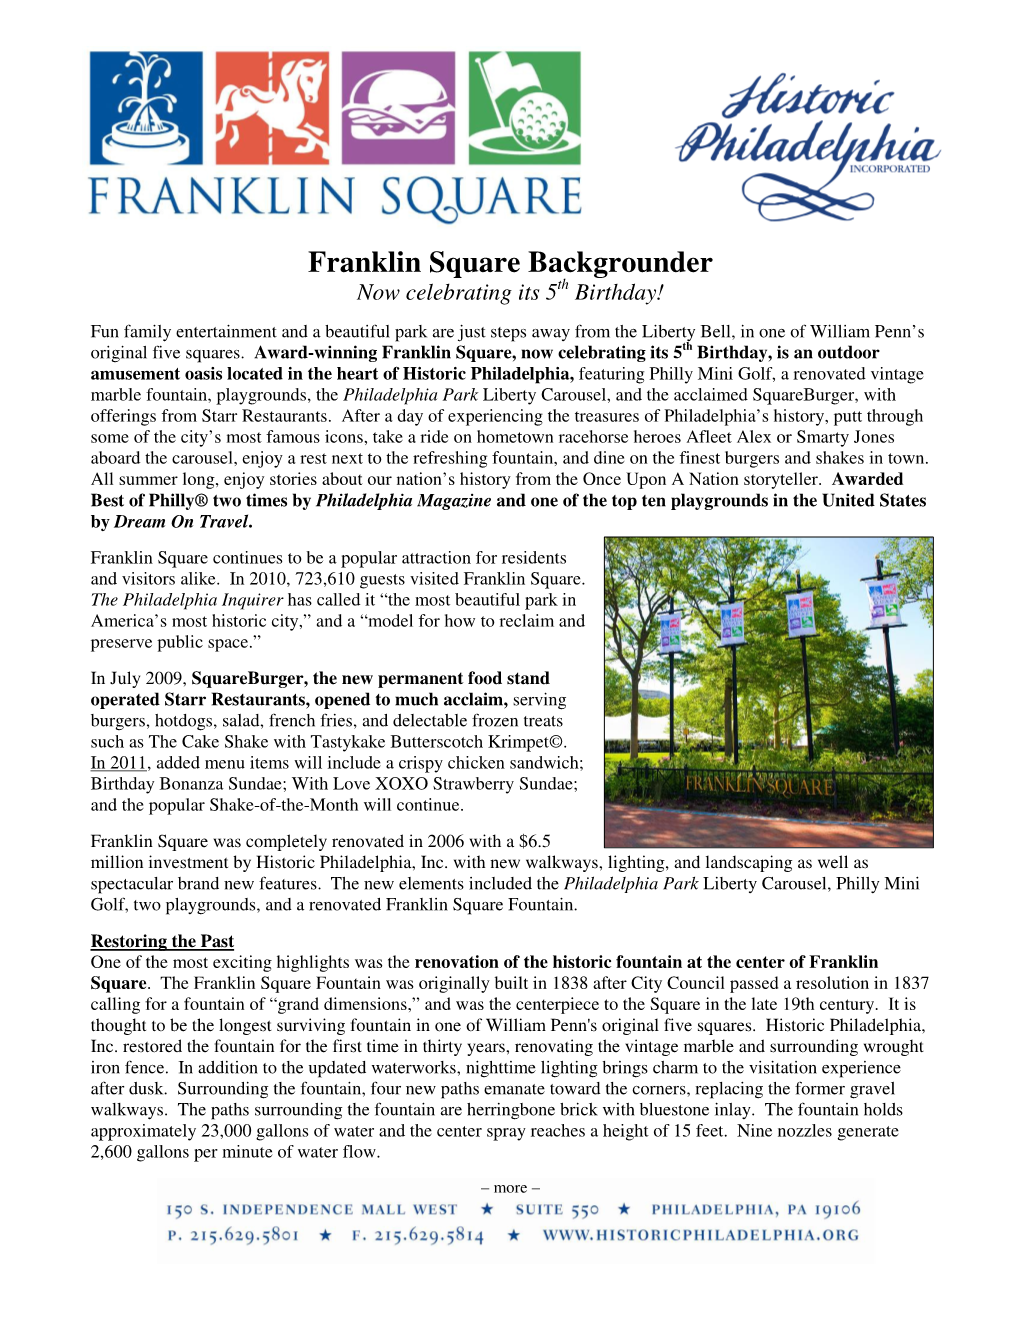 Franklin Square Backgrounder Now Celebrating Its 5 Th Birthday!